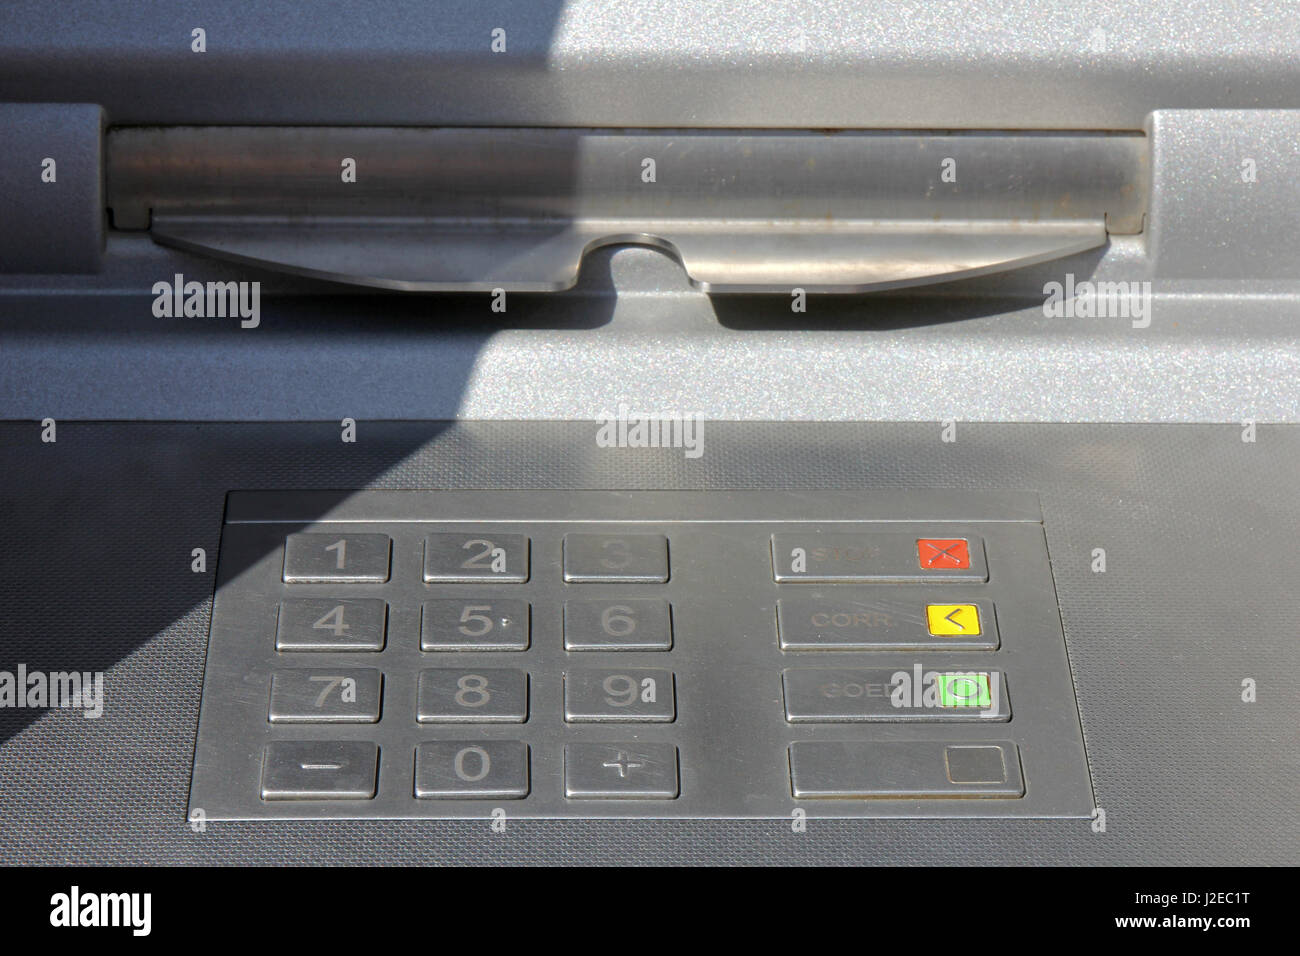 PIN pad of a Dutch automated teller machine Stock Photo